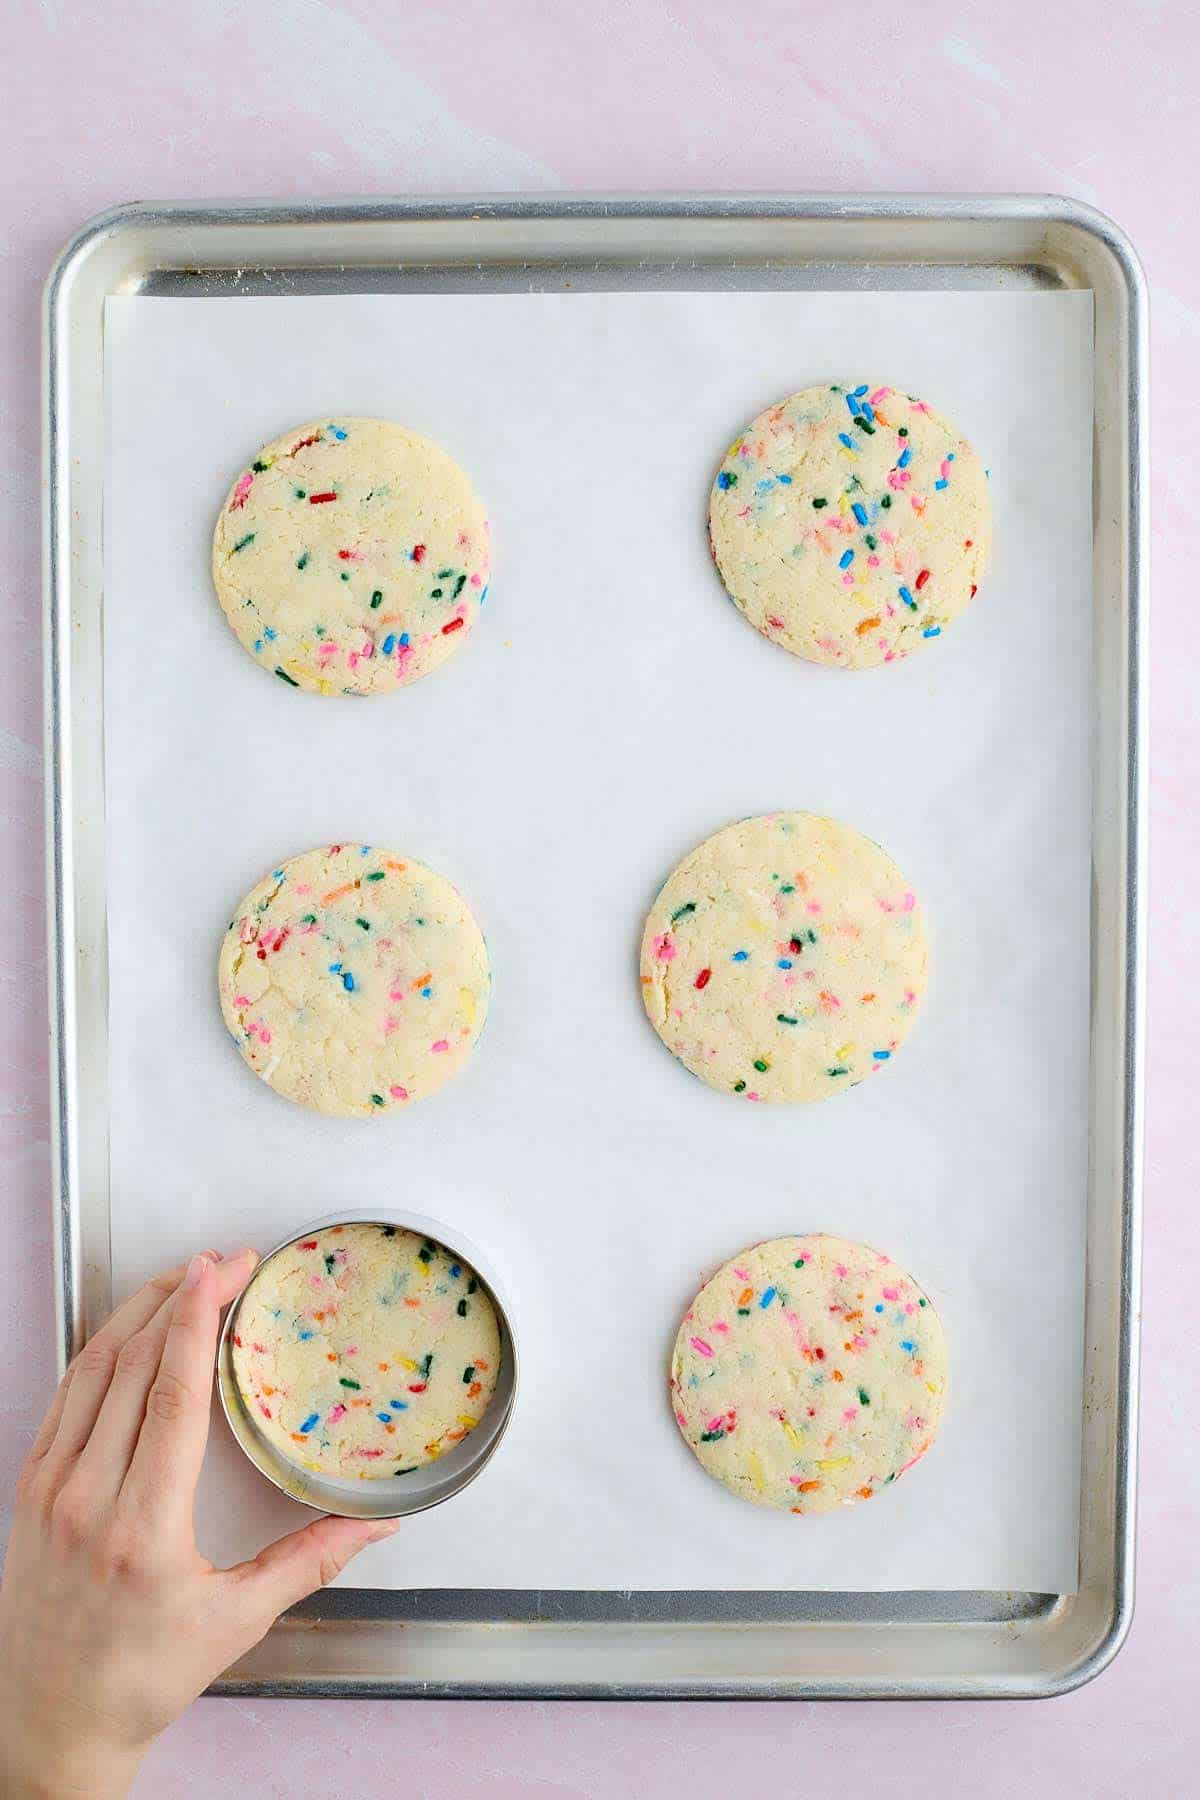 Shaping the warm Funfetti cookies with a cookie ring on a baking sheet.